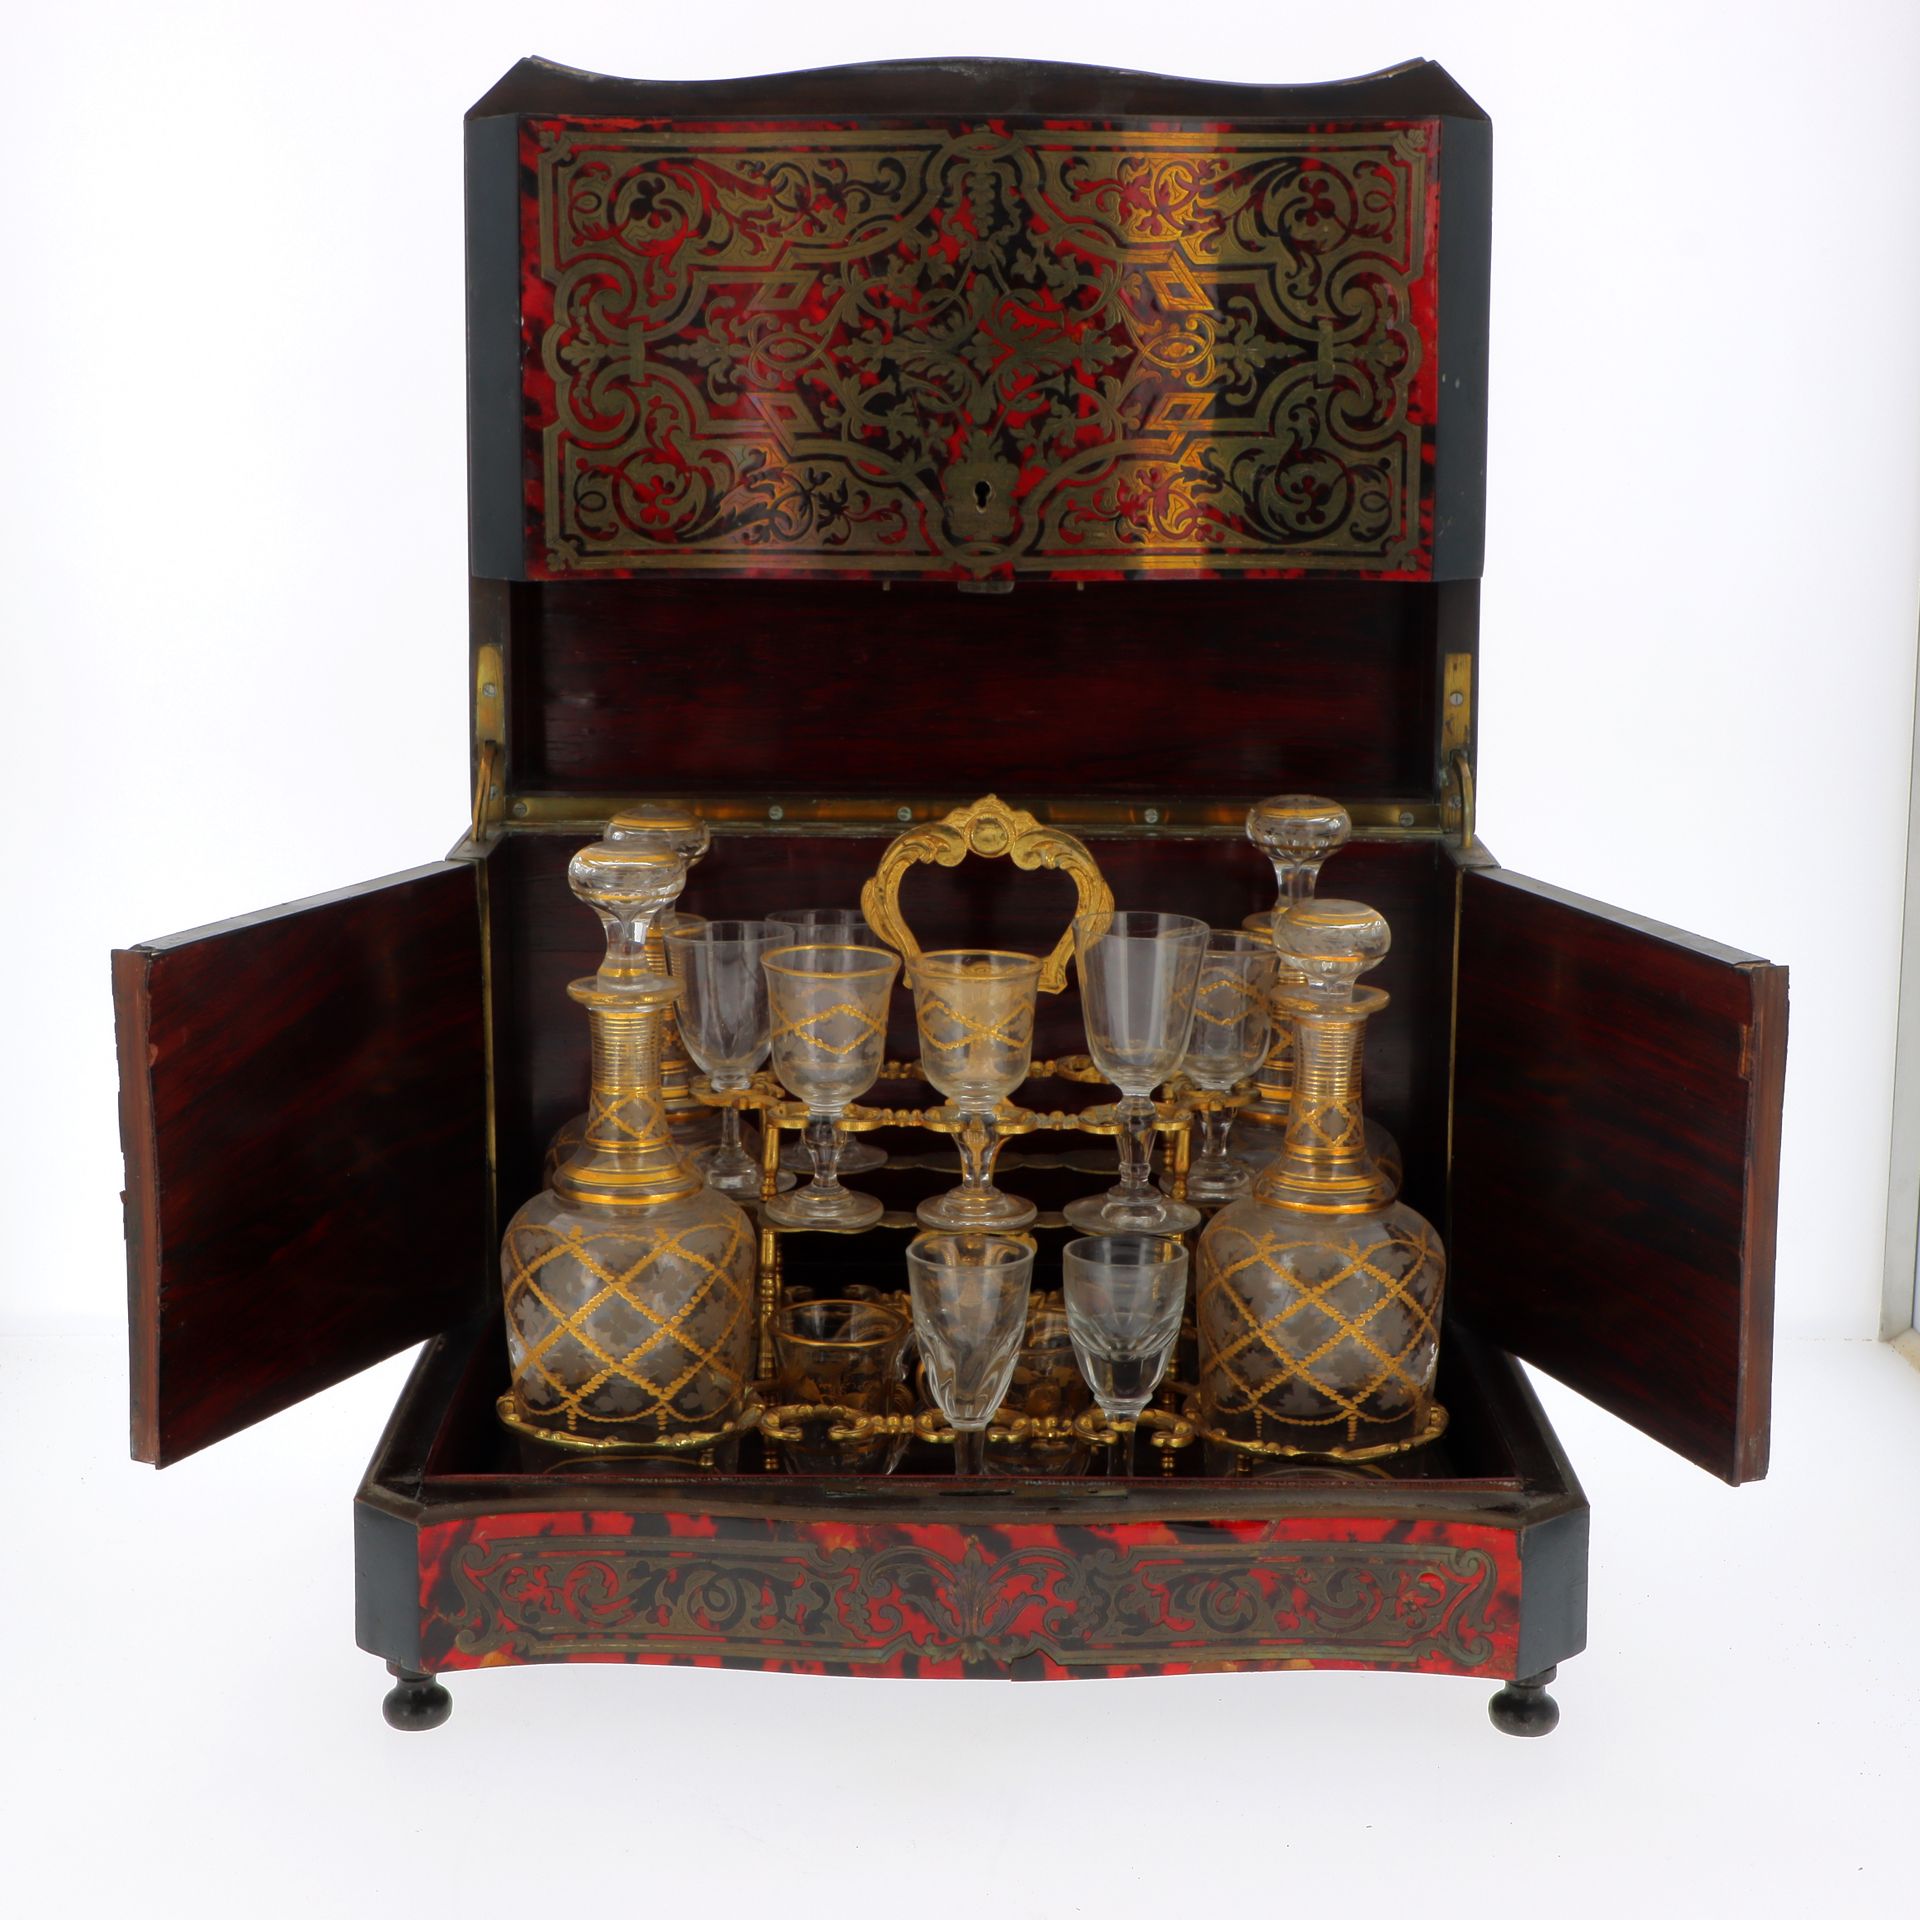 Null LIQUOR CELLAR
In blackened wood and marquetry of red scales and copper, wit&hellip;